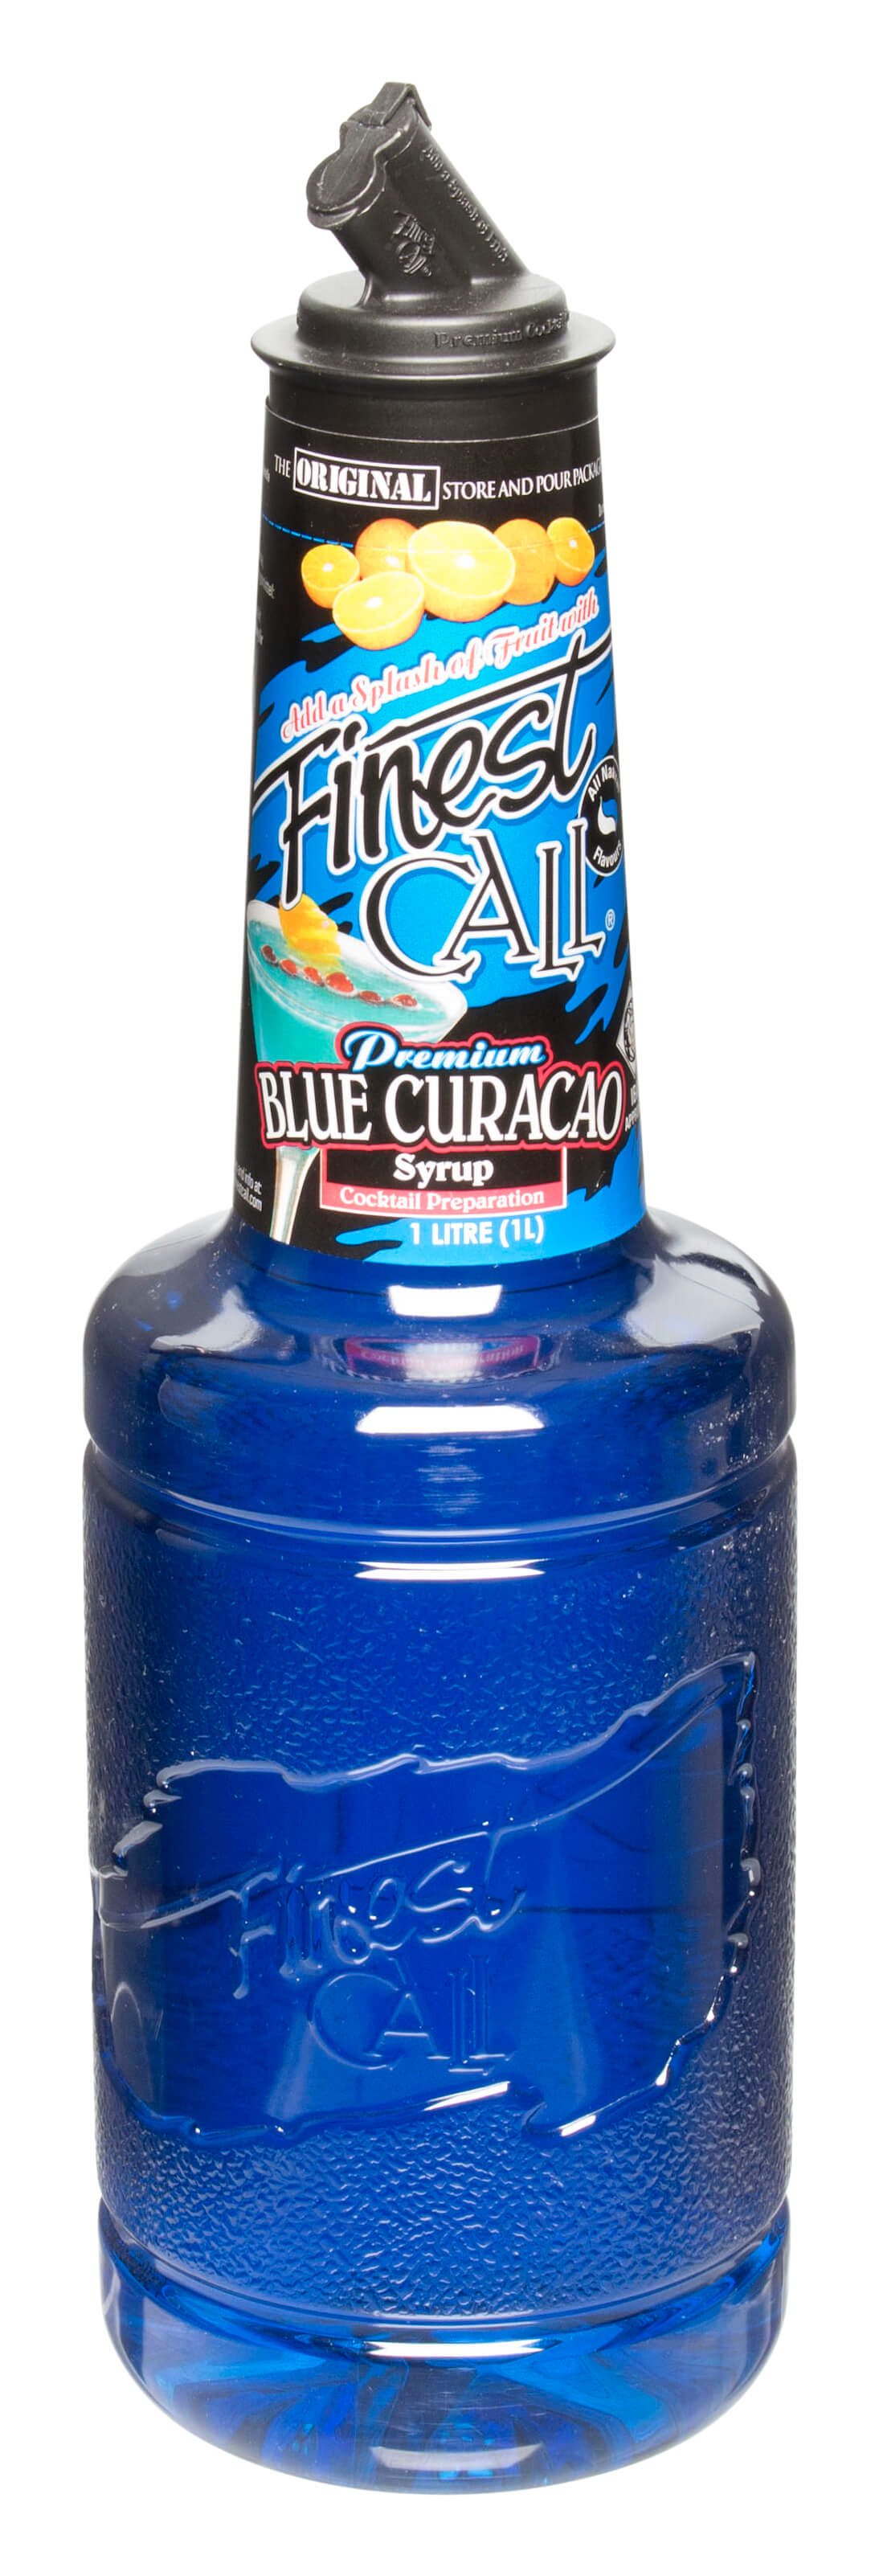 FinestCall - Blue Curacao syrup (1,0l)